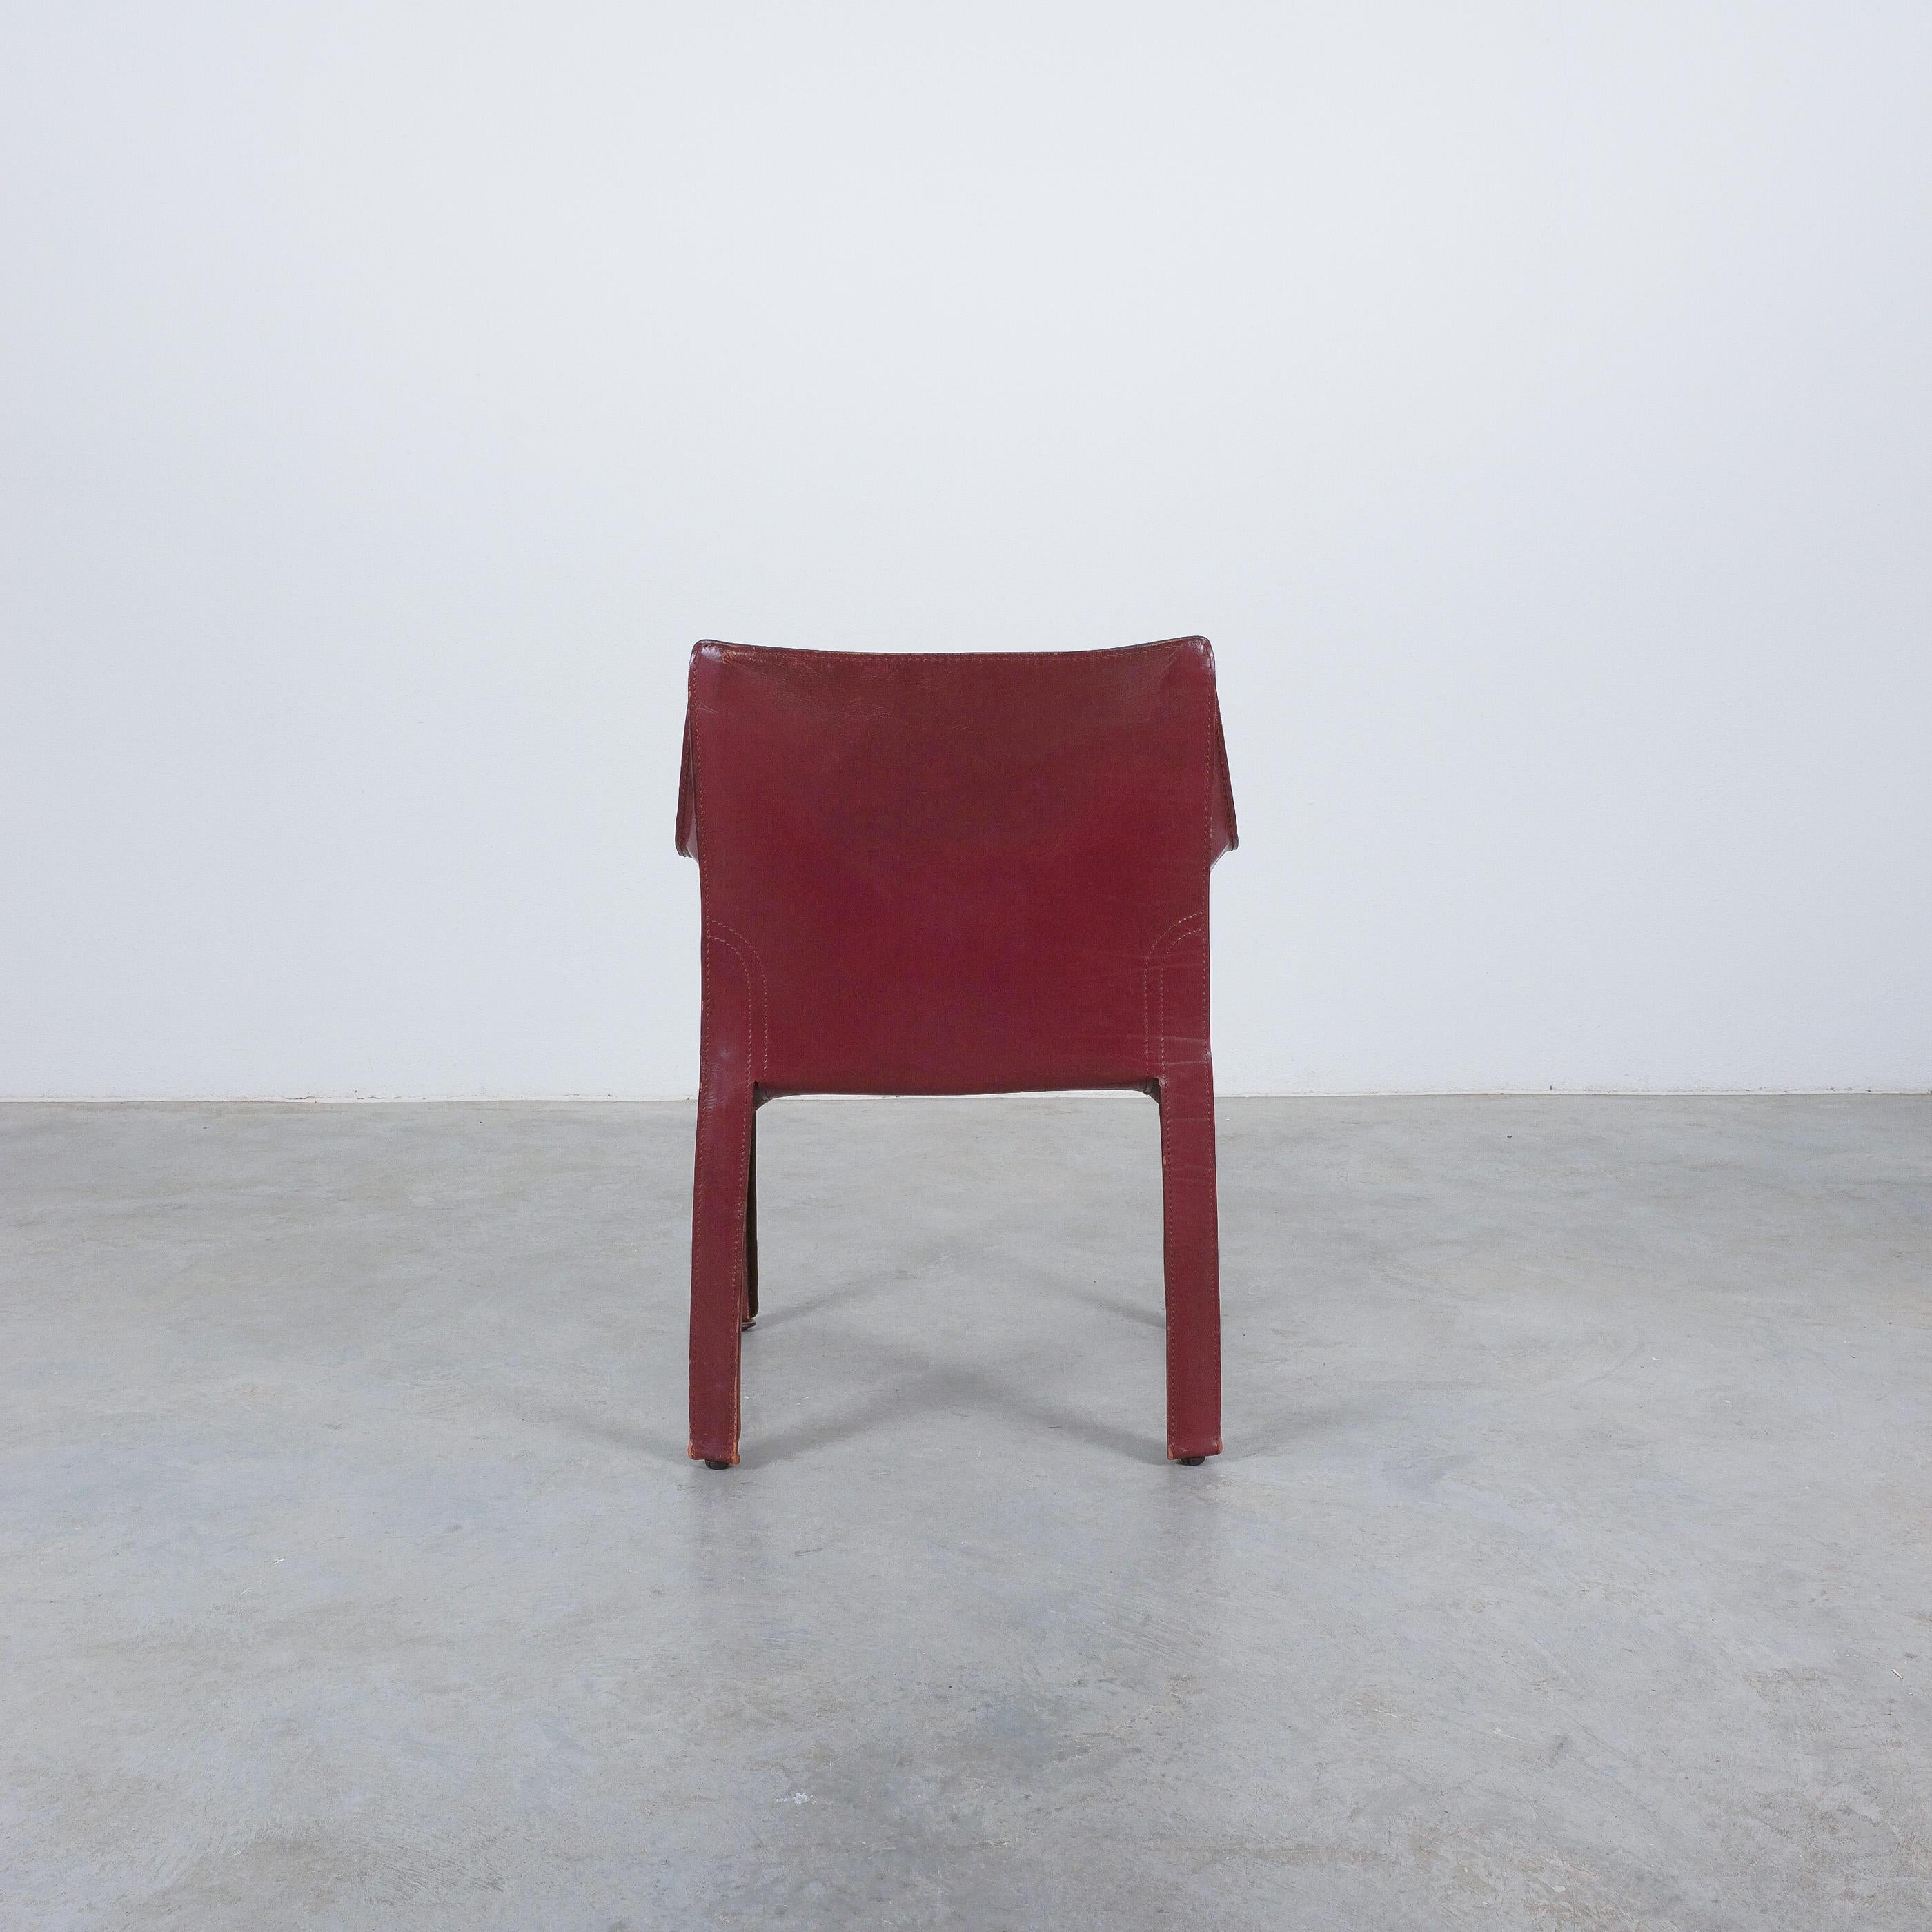 Mario Bellini Cassina Cab 413 Burgundy Red Leather Dining Chairs, 1980 3